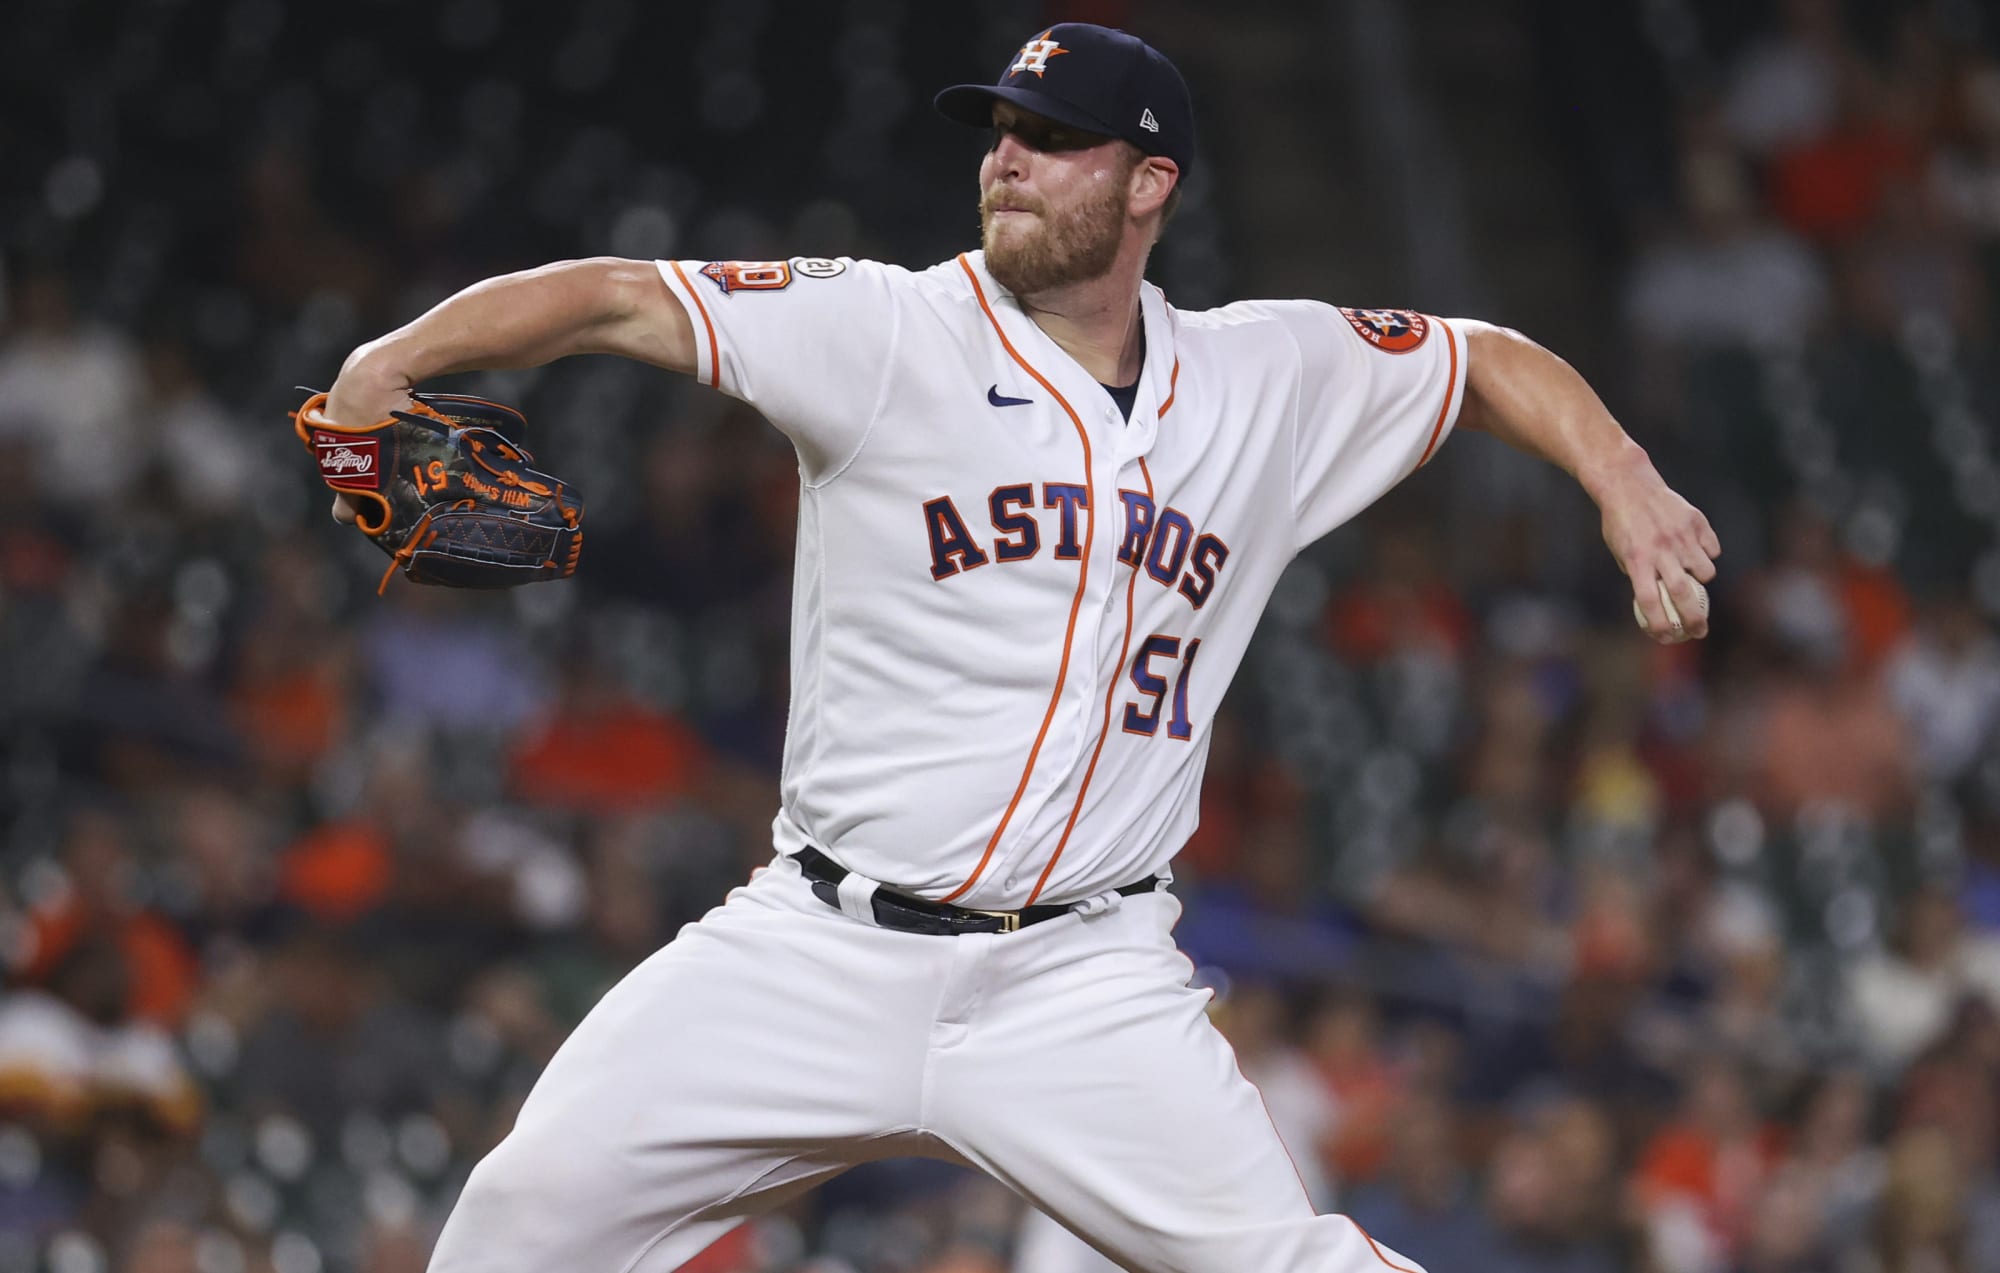 Will Smith has become Astros’ latest pitching success story